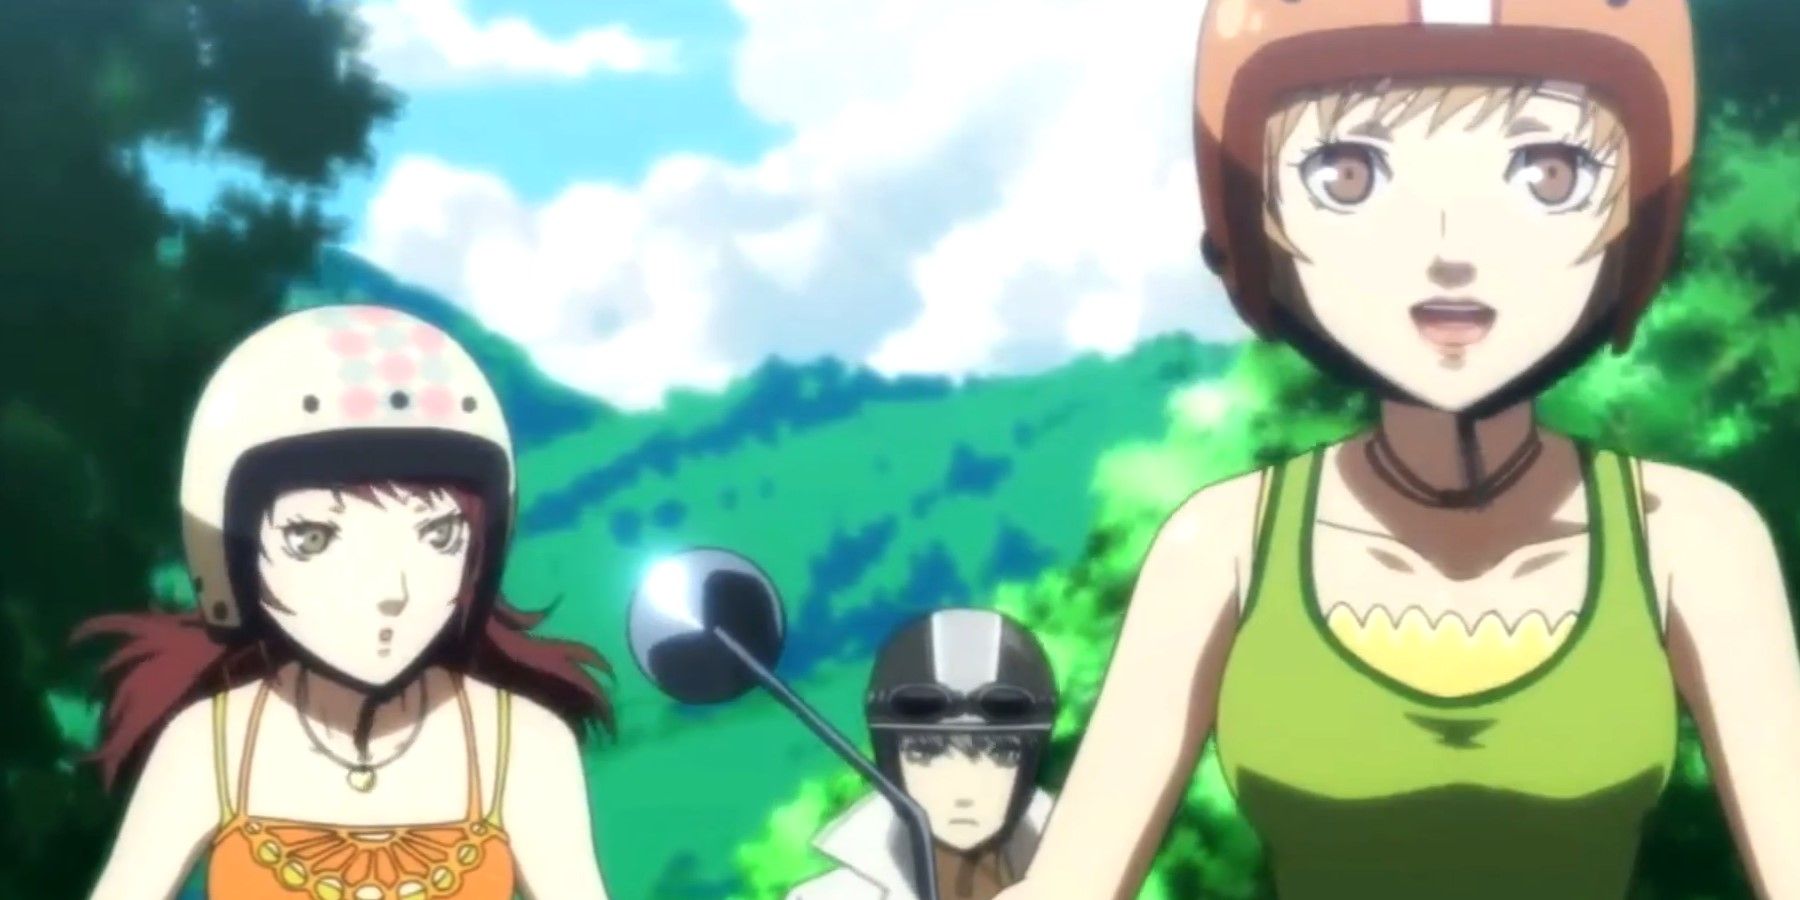 P4G Chie, Rise, and the MC riding with everyone to the beach